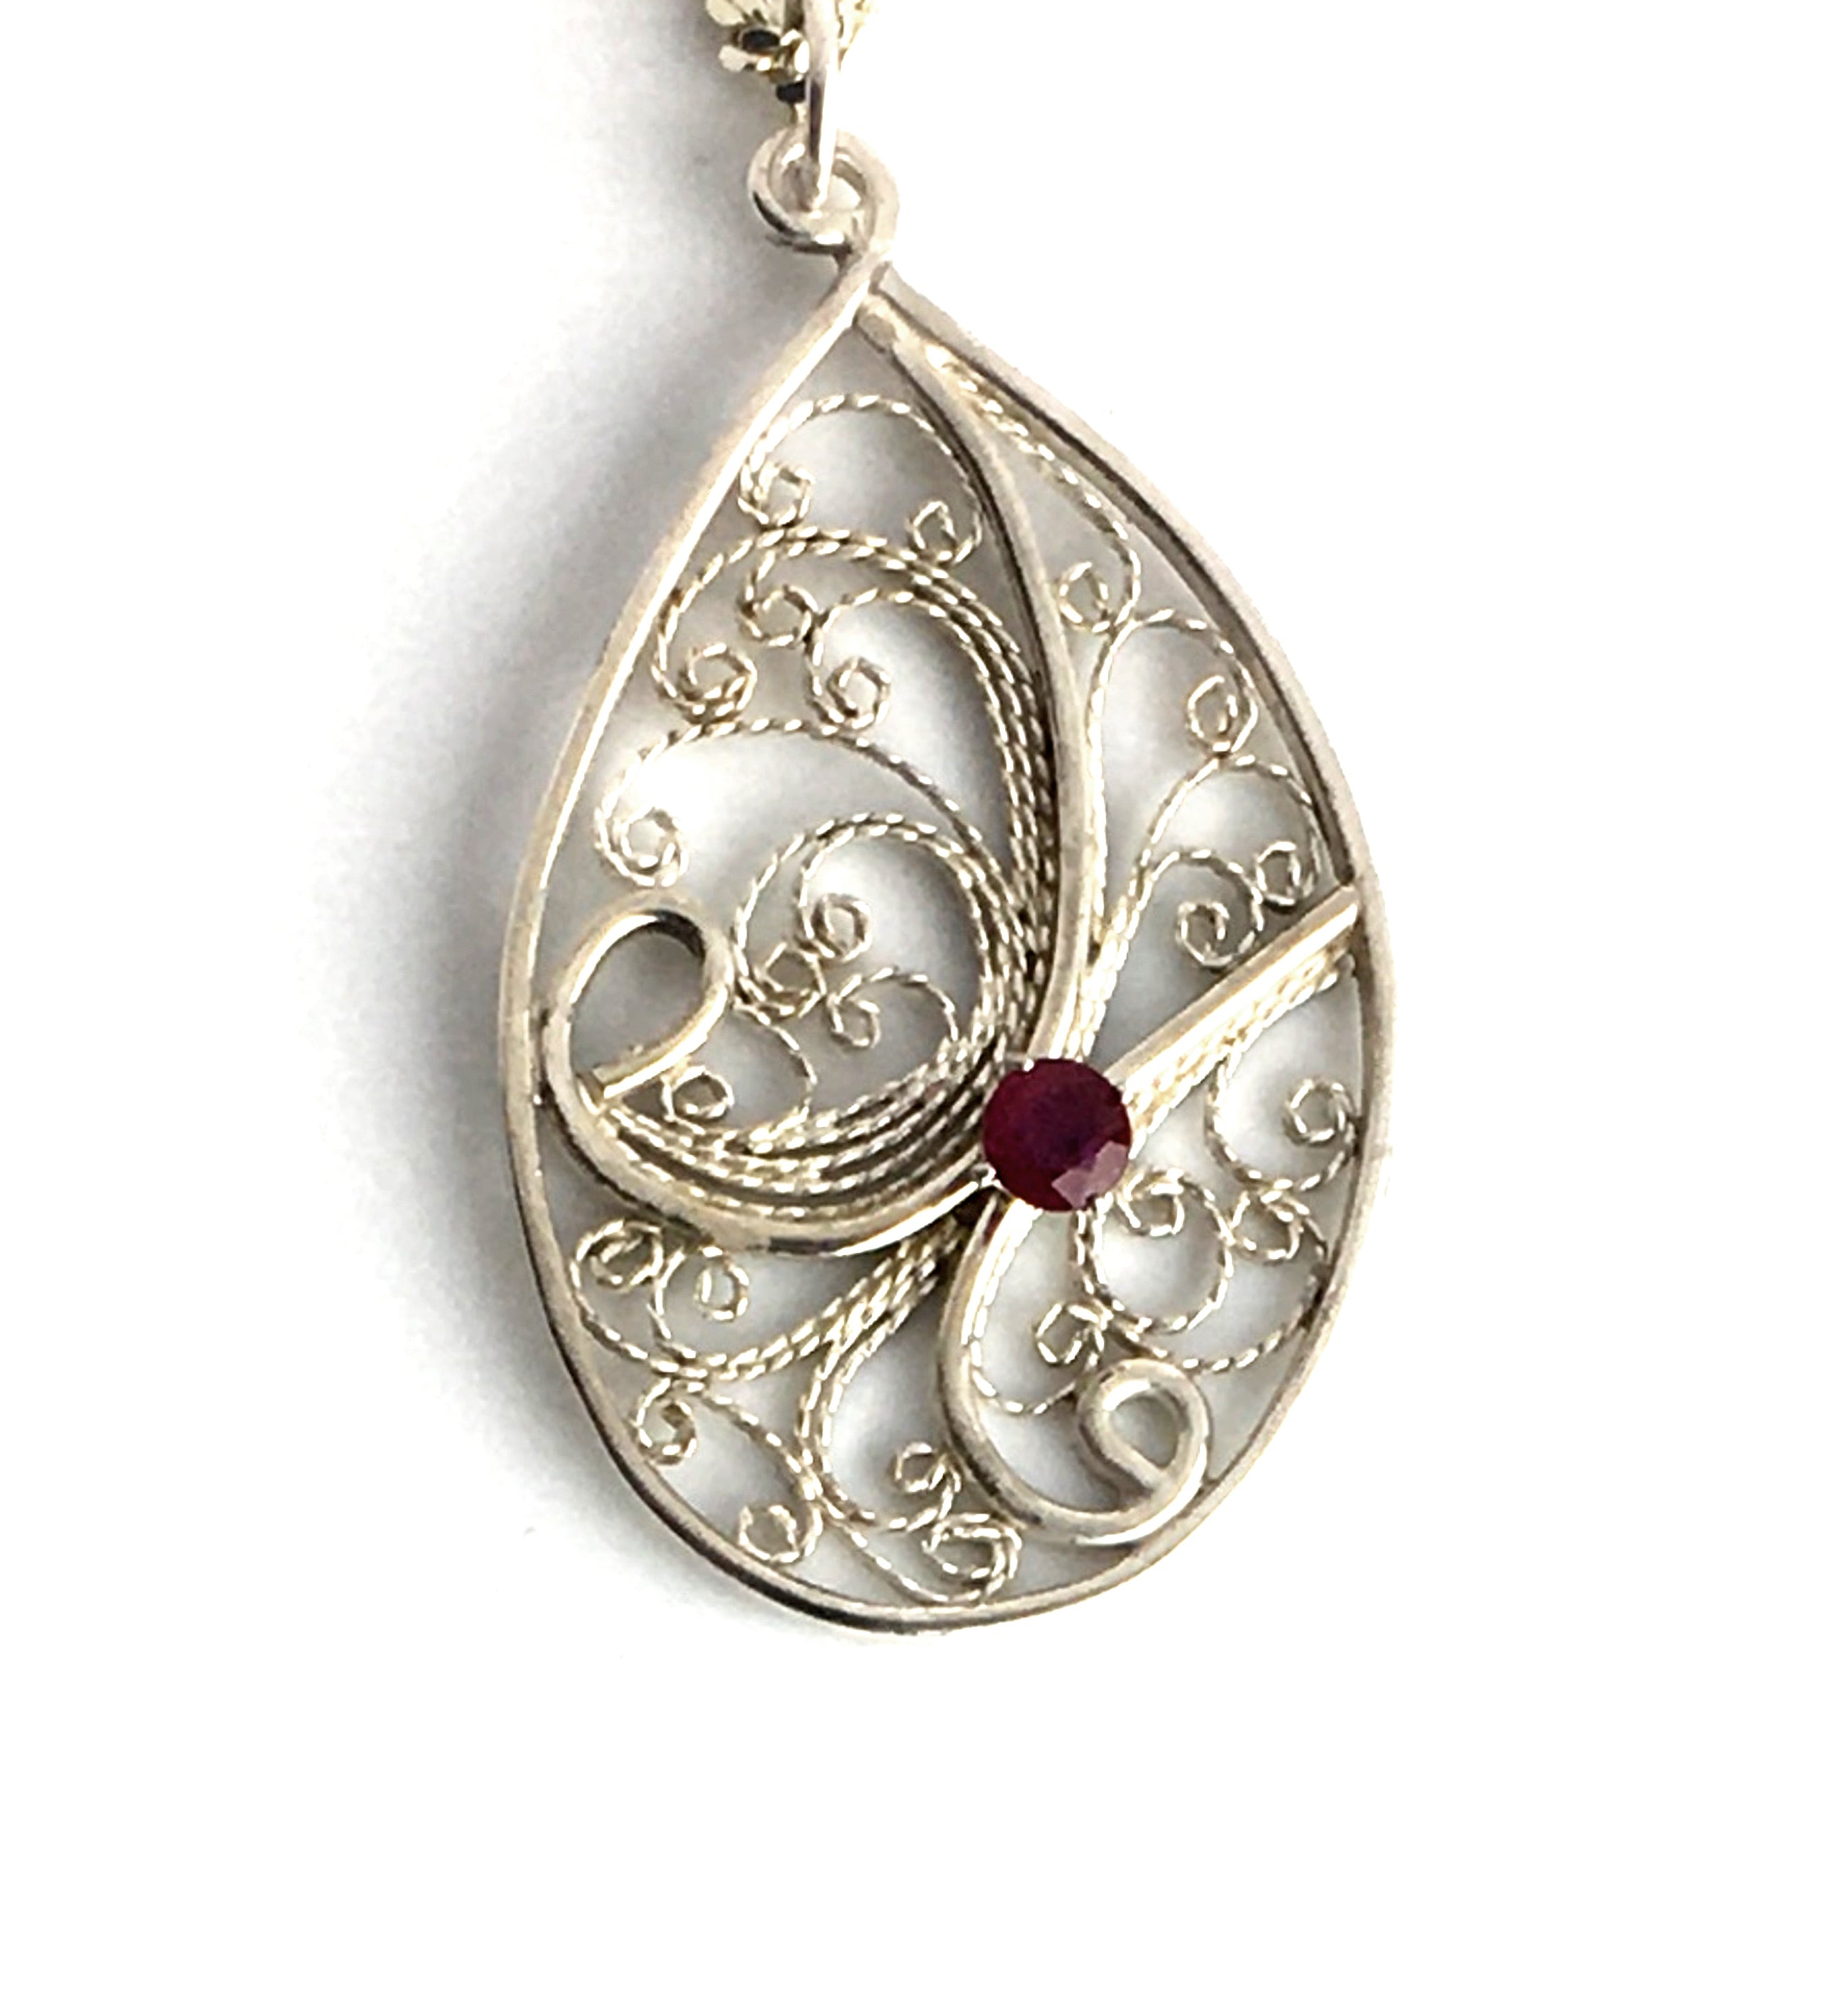 Handmade Filigree Pendant Necklace with Ruby